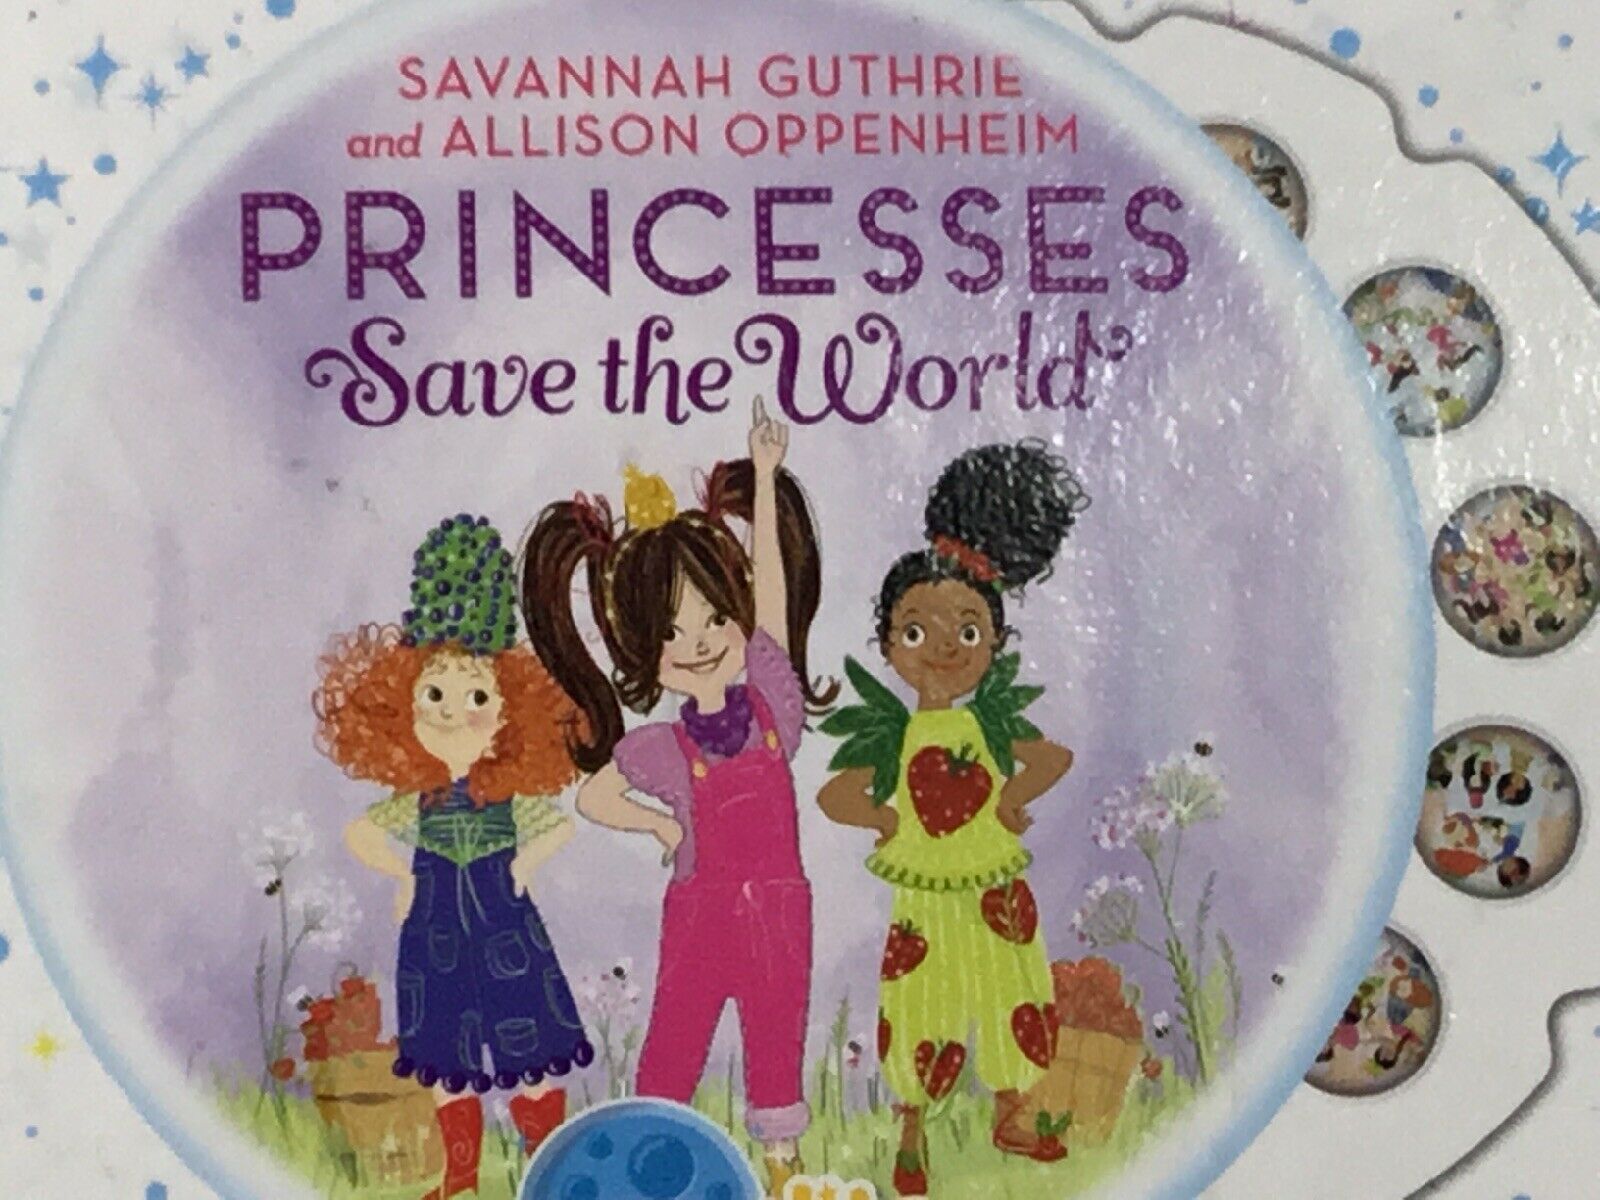 Moonlite Story Reel Princesses Save World for phone projector story time